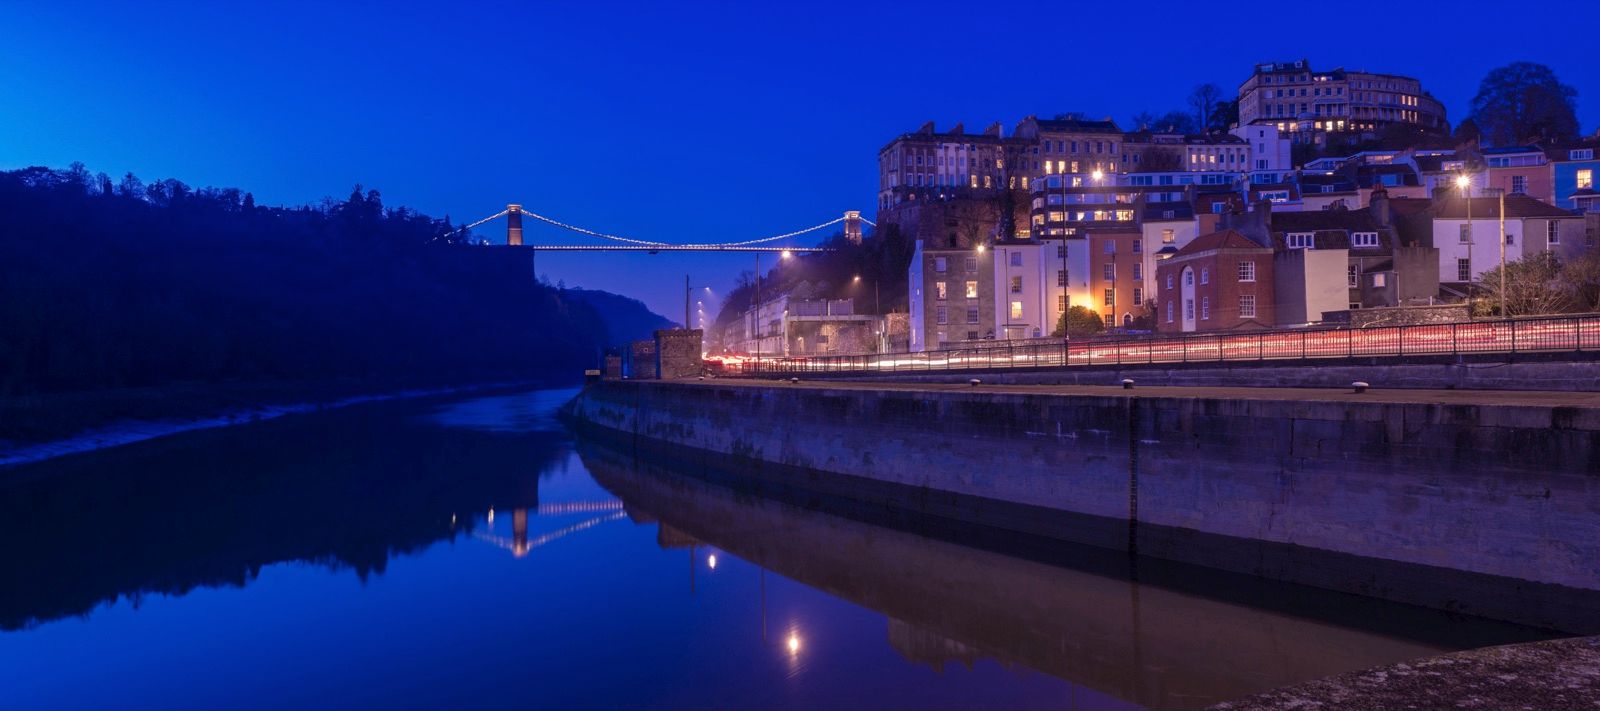 Best photo places in Bristol The secret instagram spots youll want to snap image 4